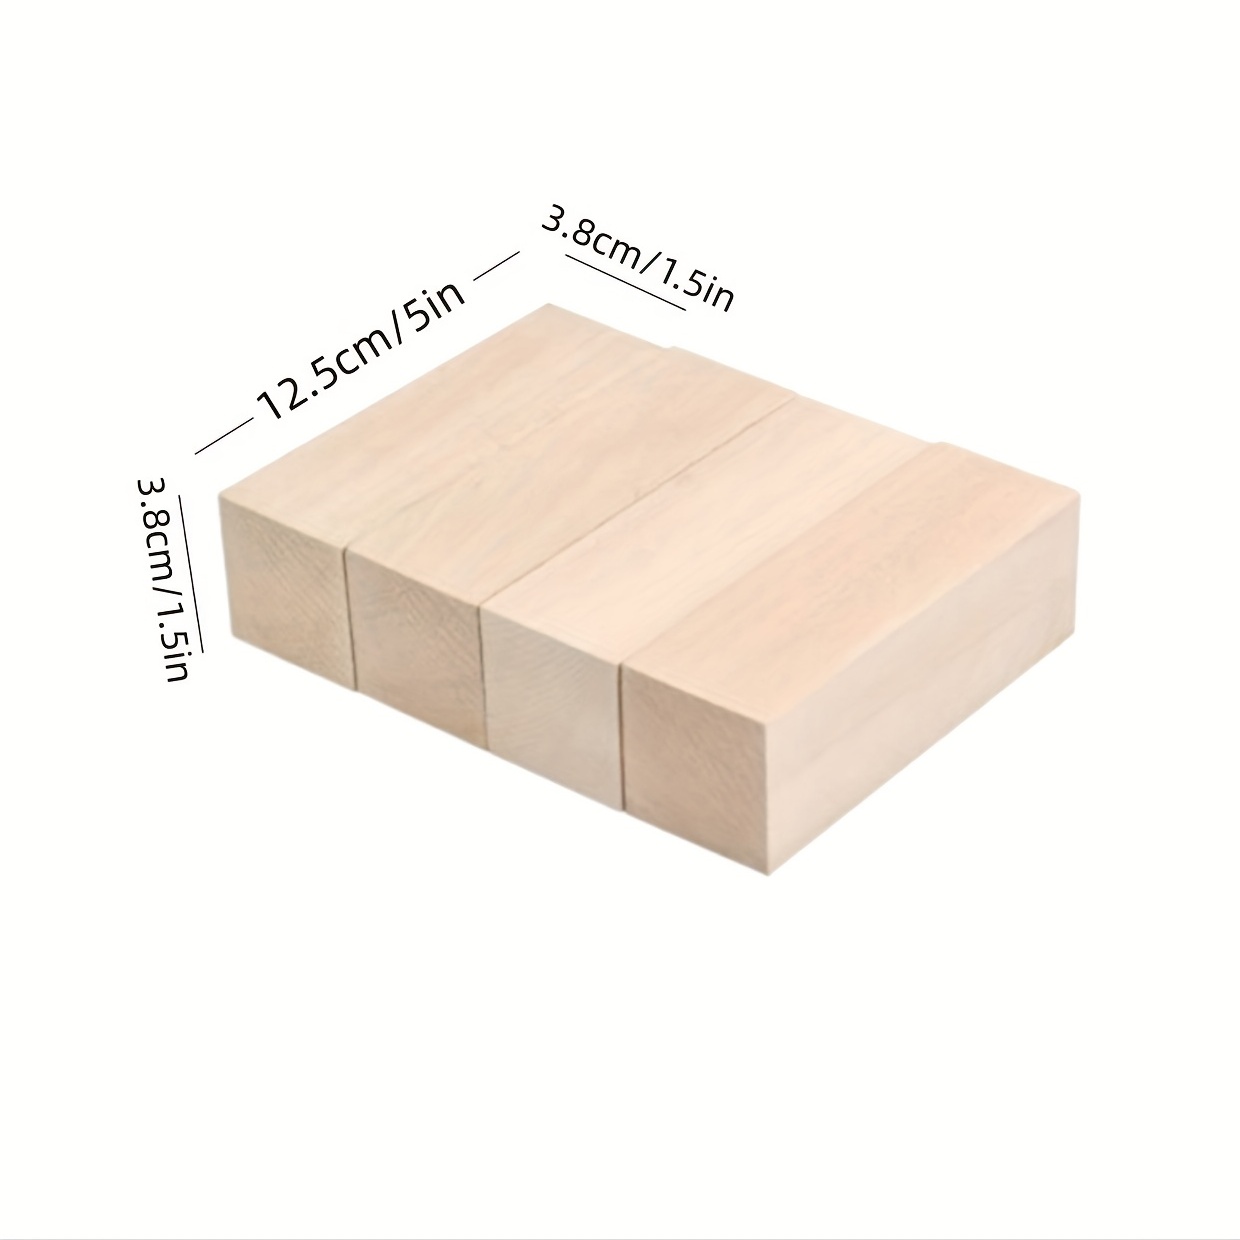 8 Pack Unfinished Basswood Carving Blocks Kit, 4 x 2 x 2 inch Unfinished Bass Wood Whittling Soft Wood Carving Block Set for Kids Adults Wood